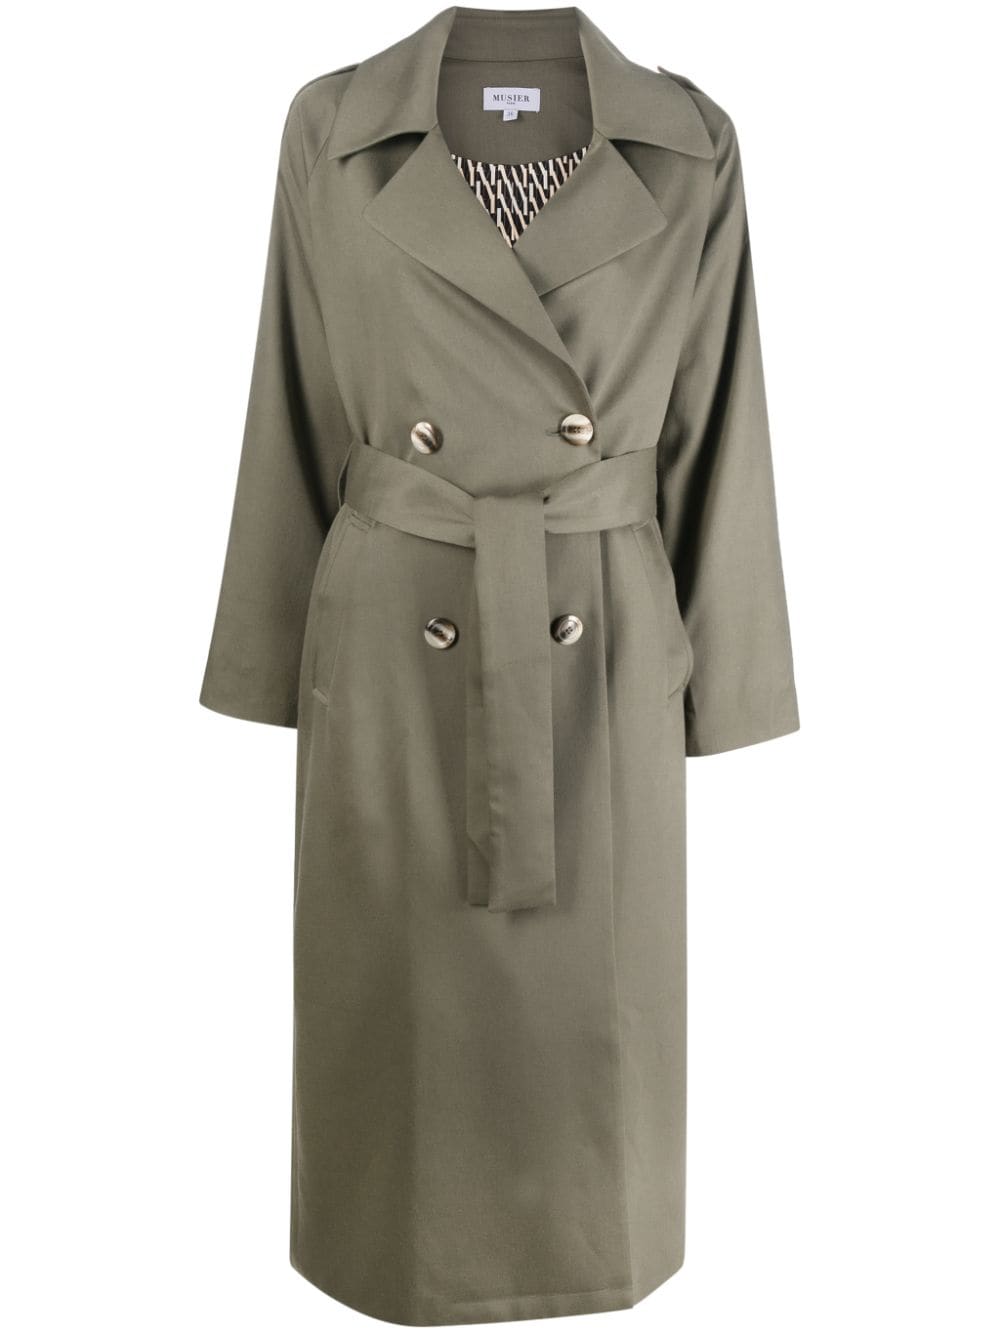 MUSIER DOROTHEE BELTED TRENCH COAT